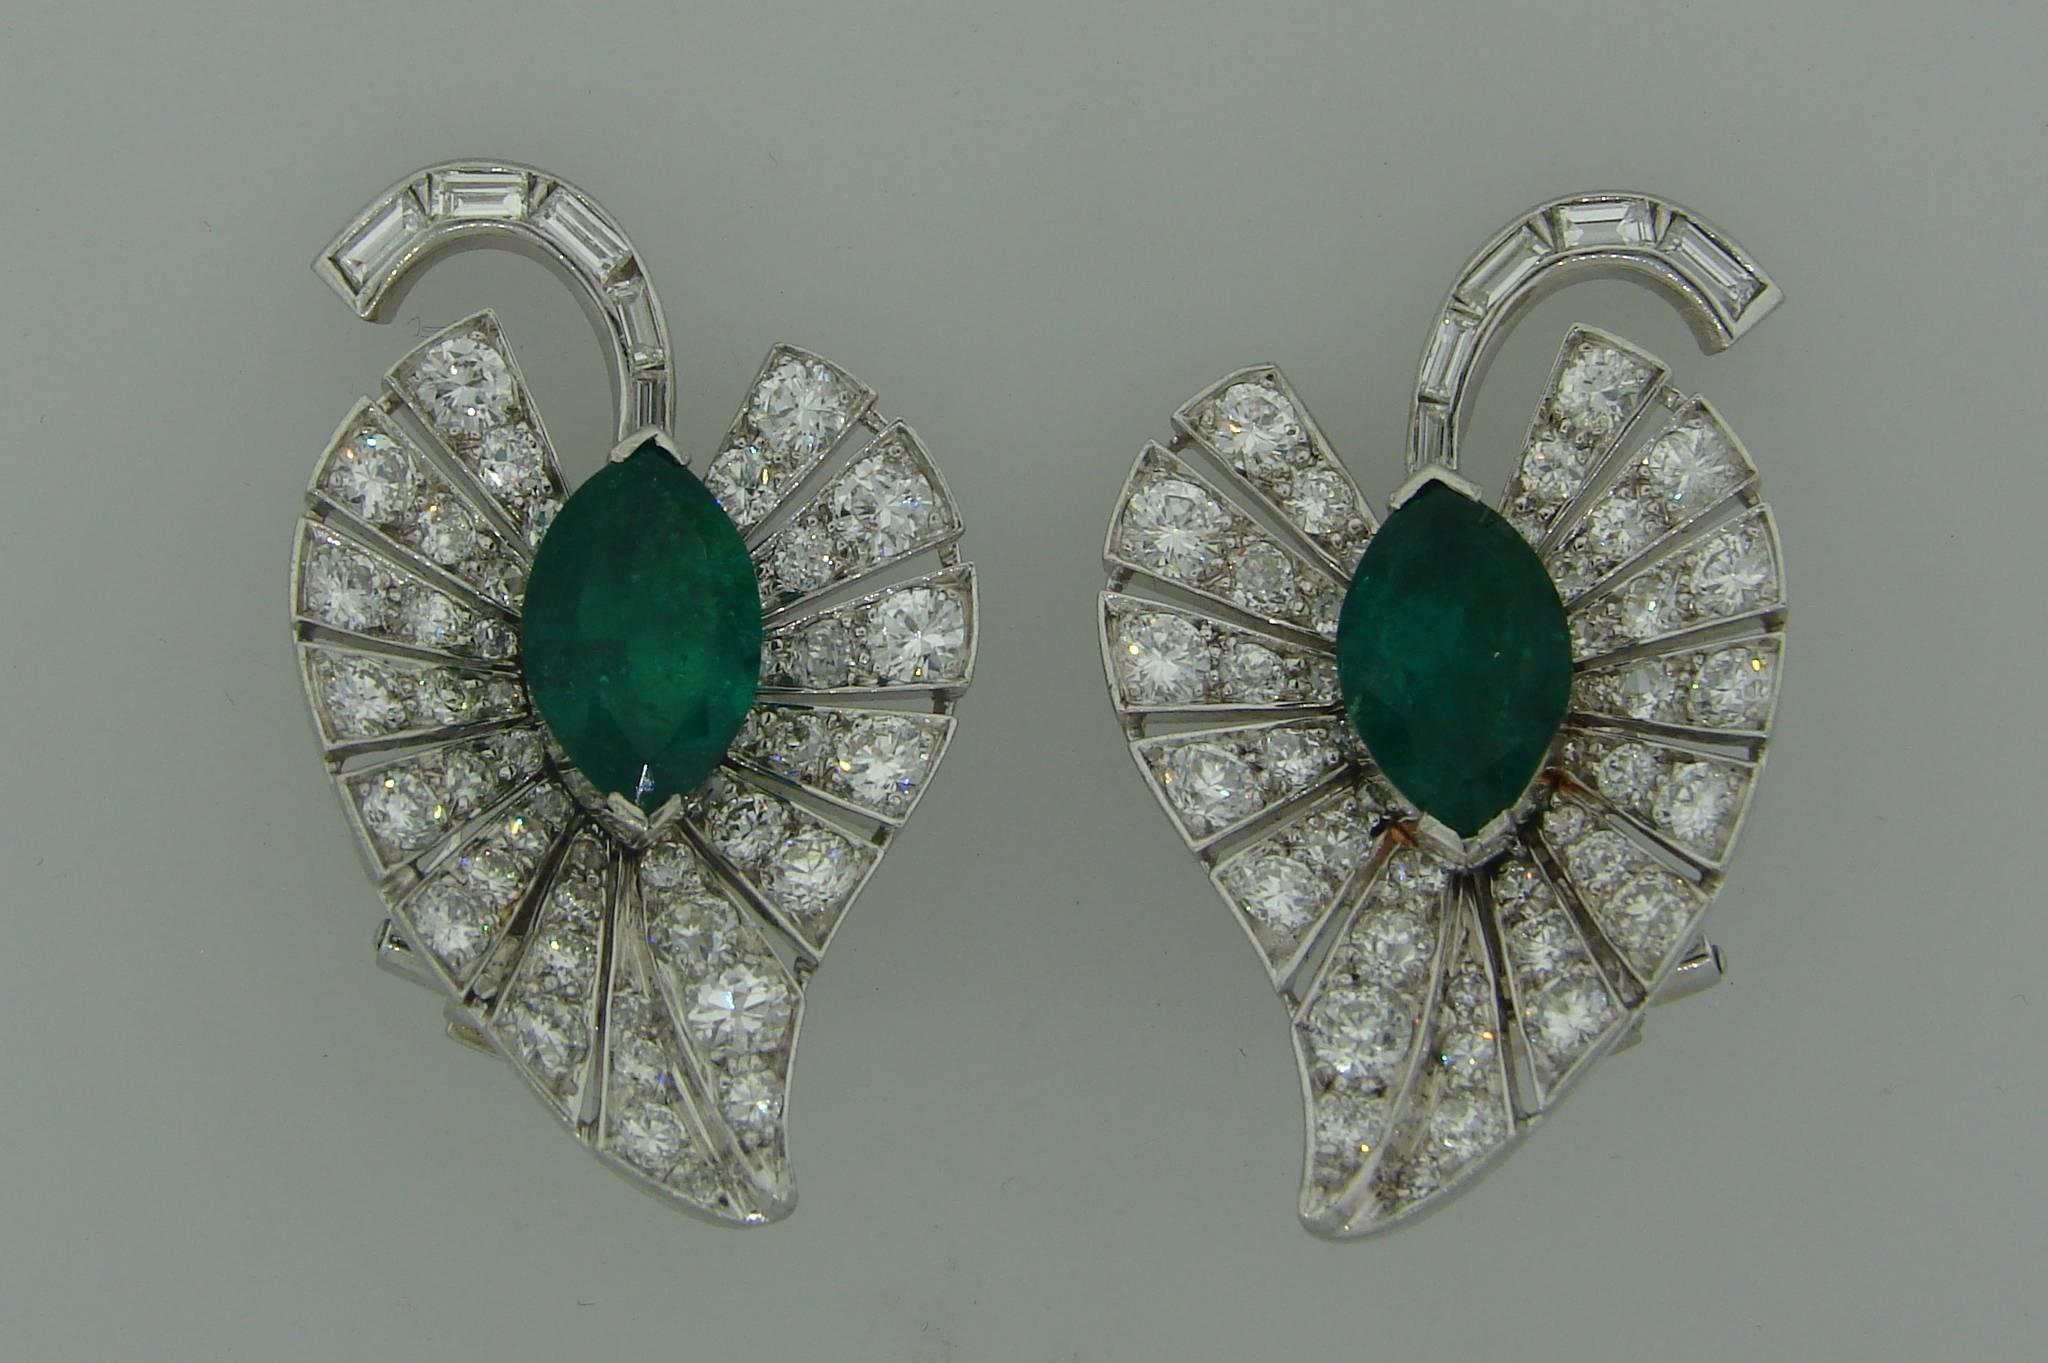 A pair of gorgeous Art Deco Revival earrings created in the 1960's. Their design was inspired by floral motif and they are created in the shape of a leaf. The earrings look very charming on the ear. 
They are tastefully made of platinum, feature